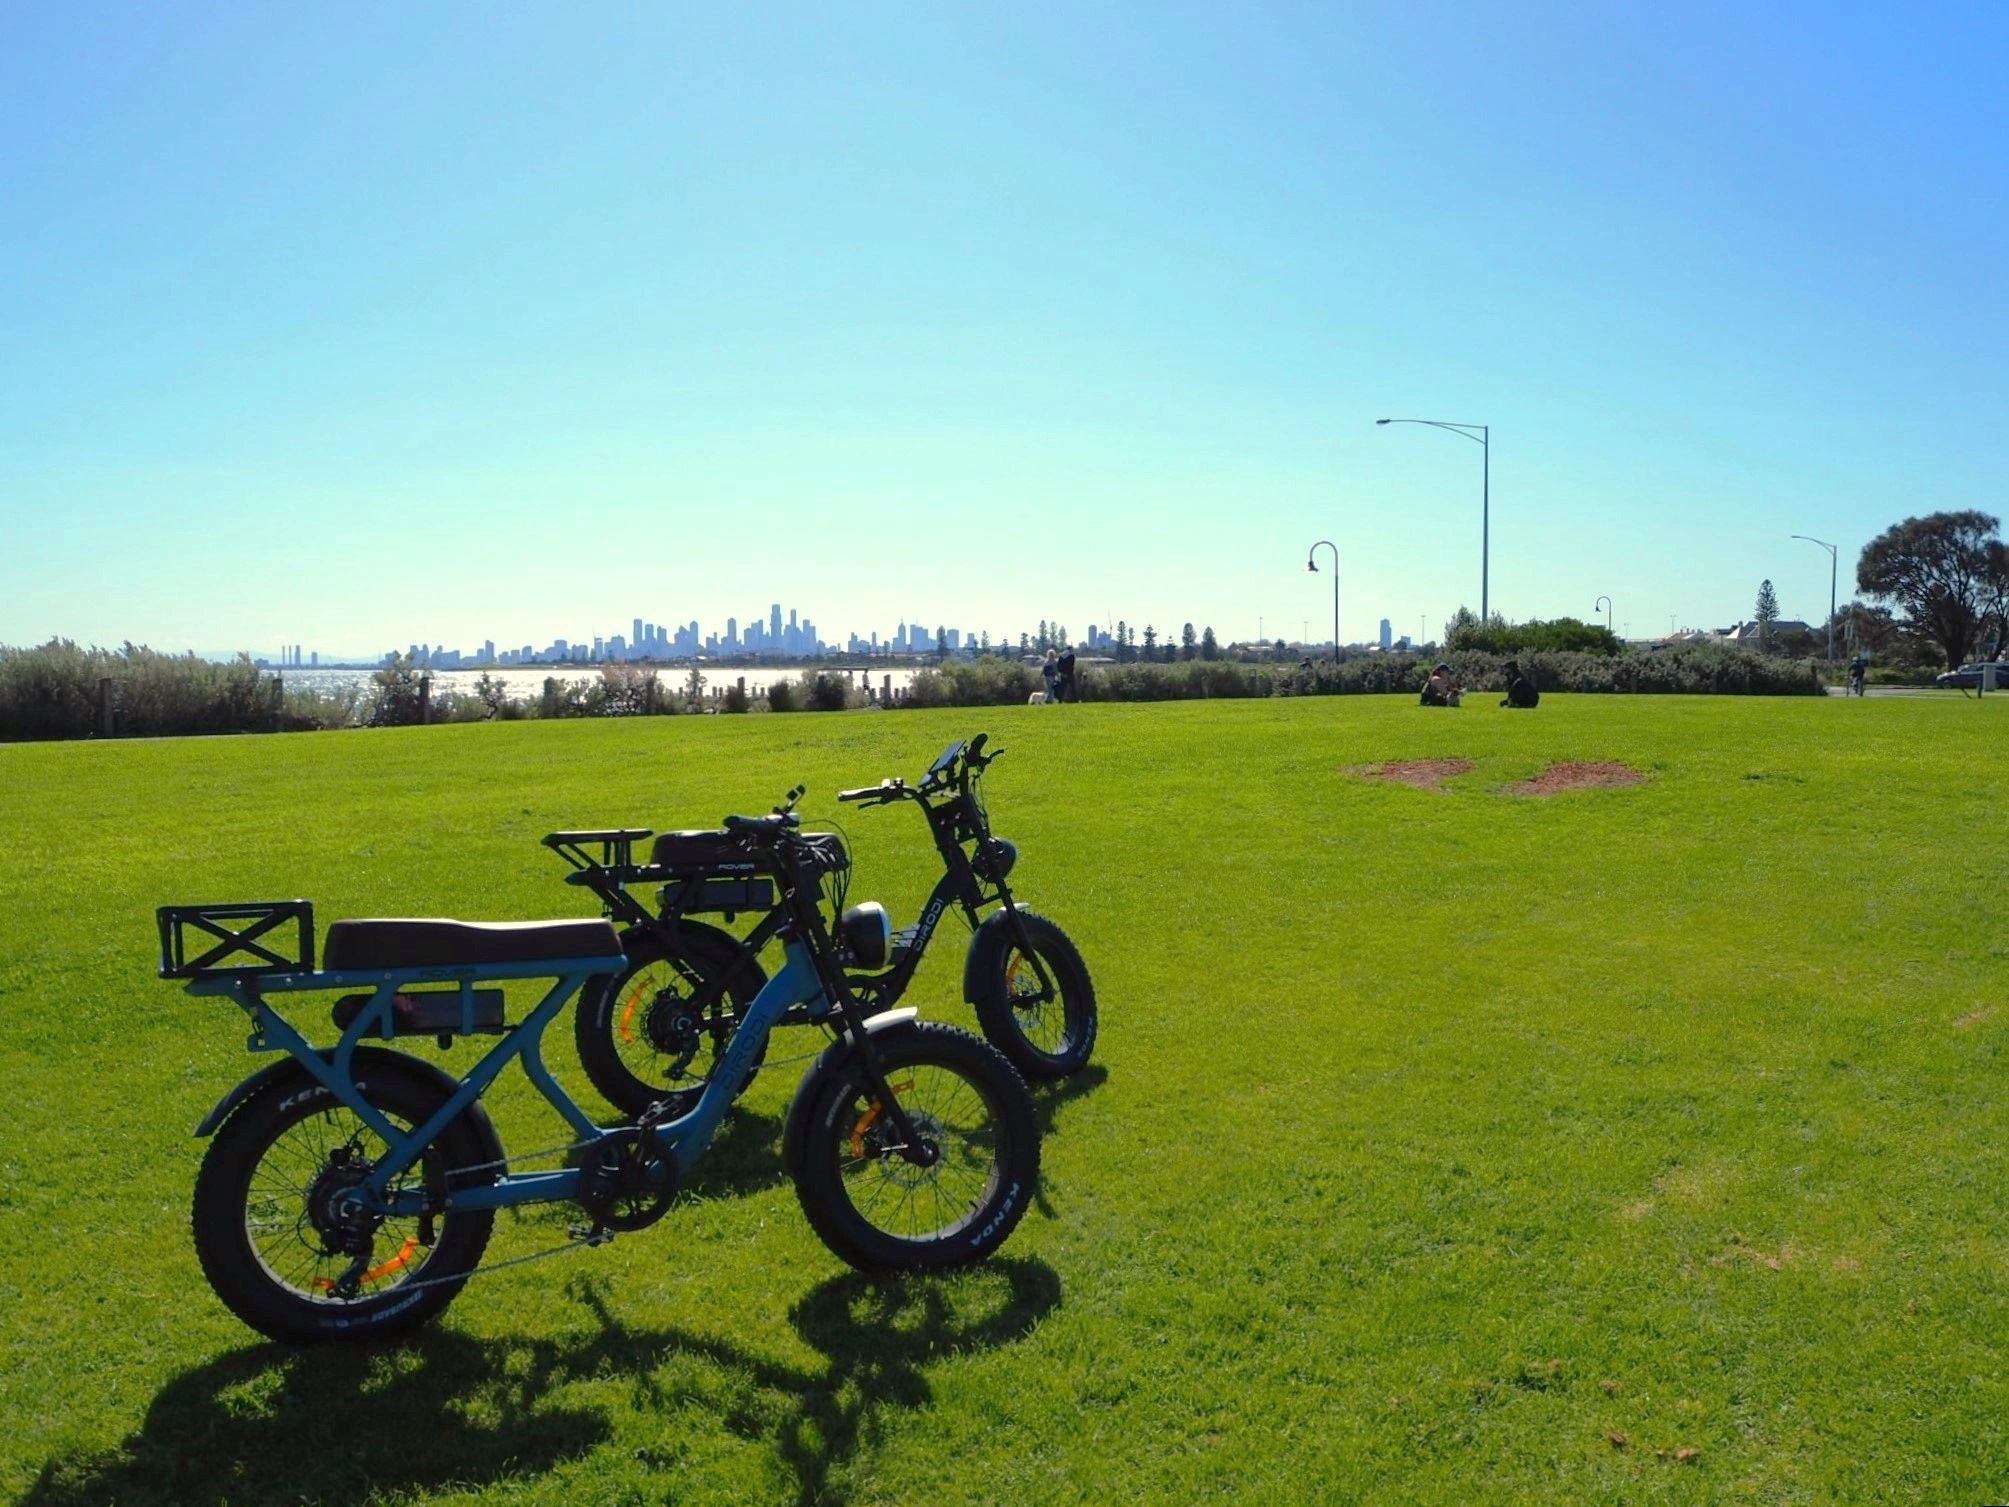 Bay Bikes E-bikes parked on the grass in front of the ocean. You can see the Melbourne CBD skyline.